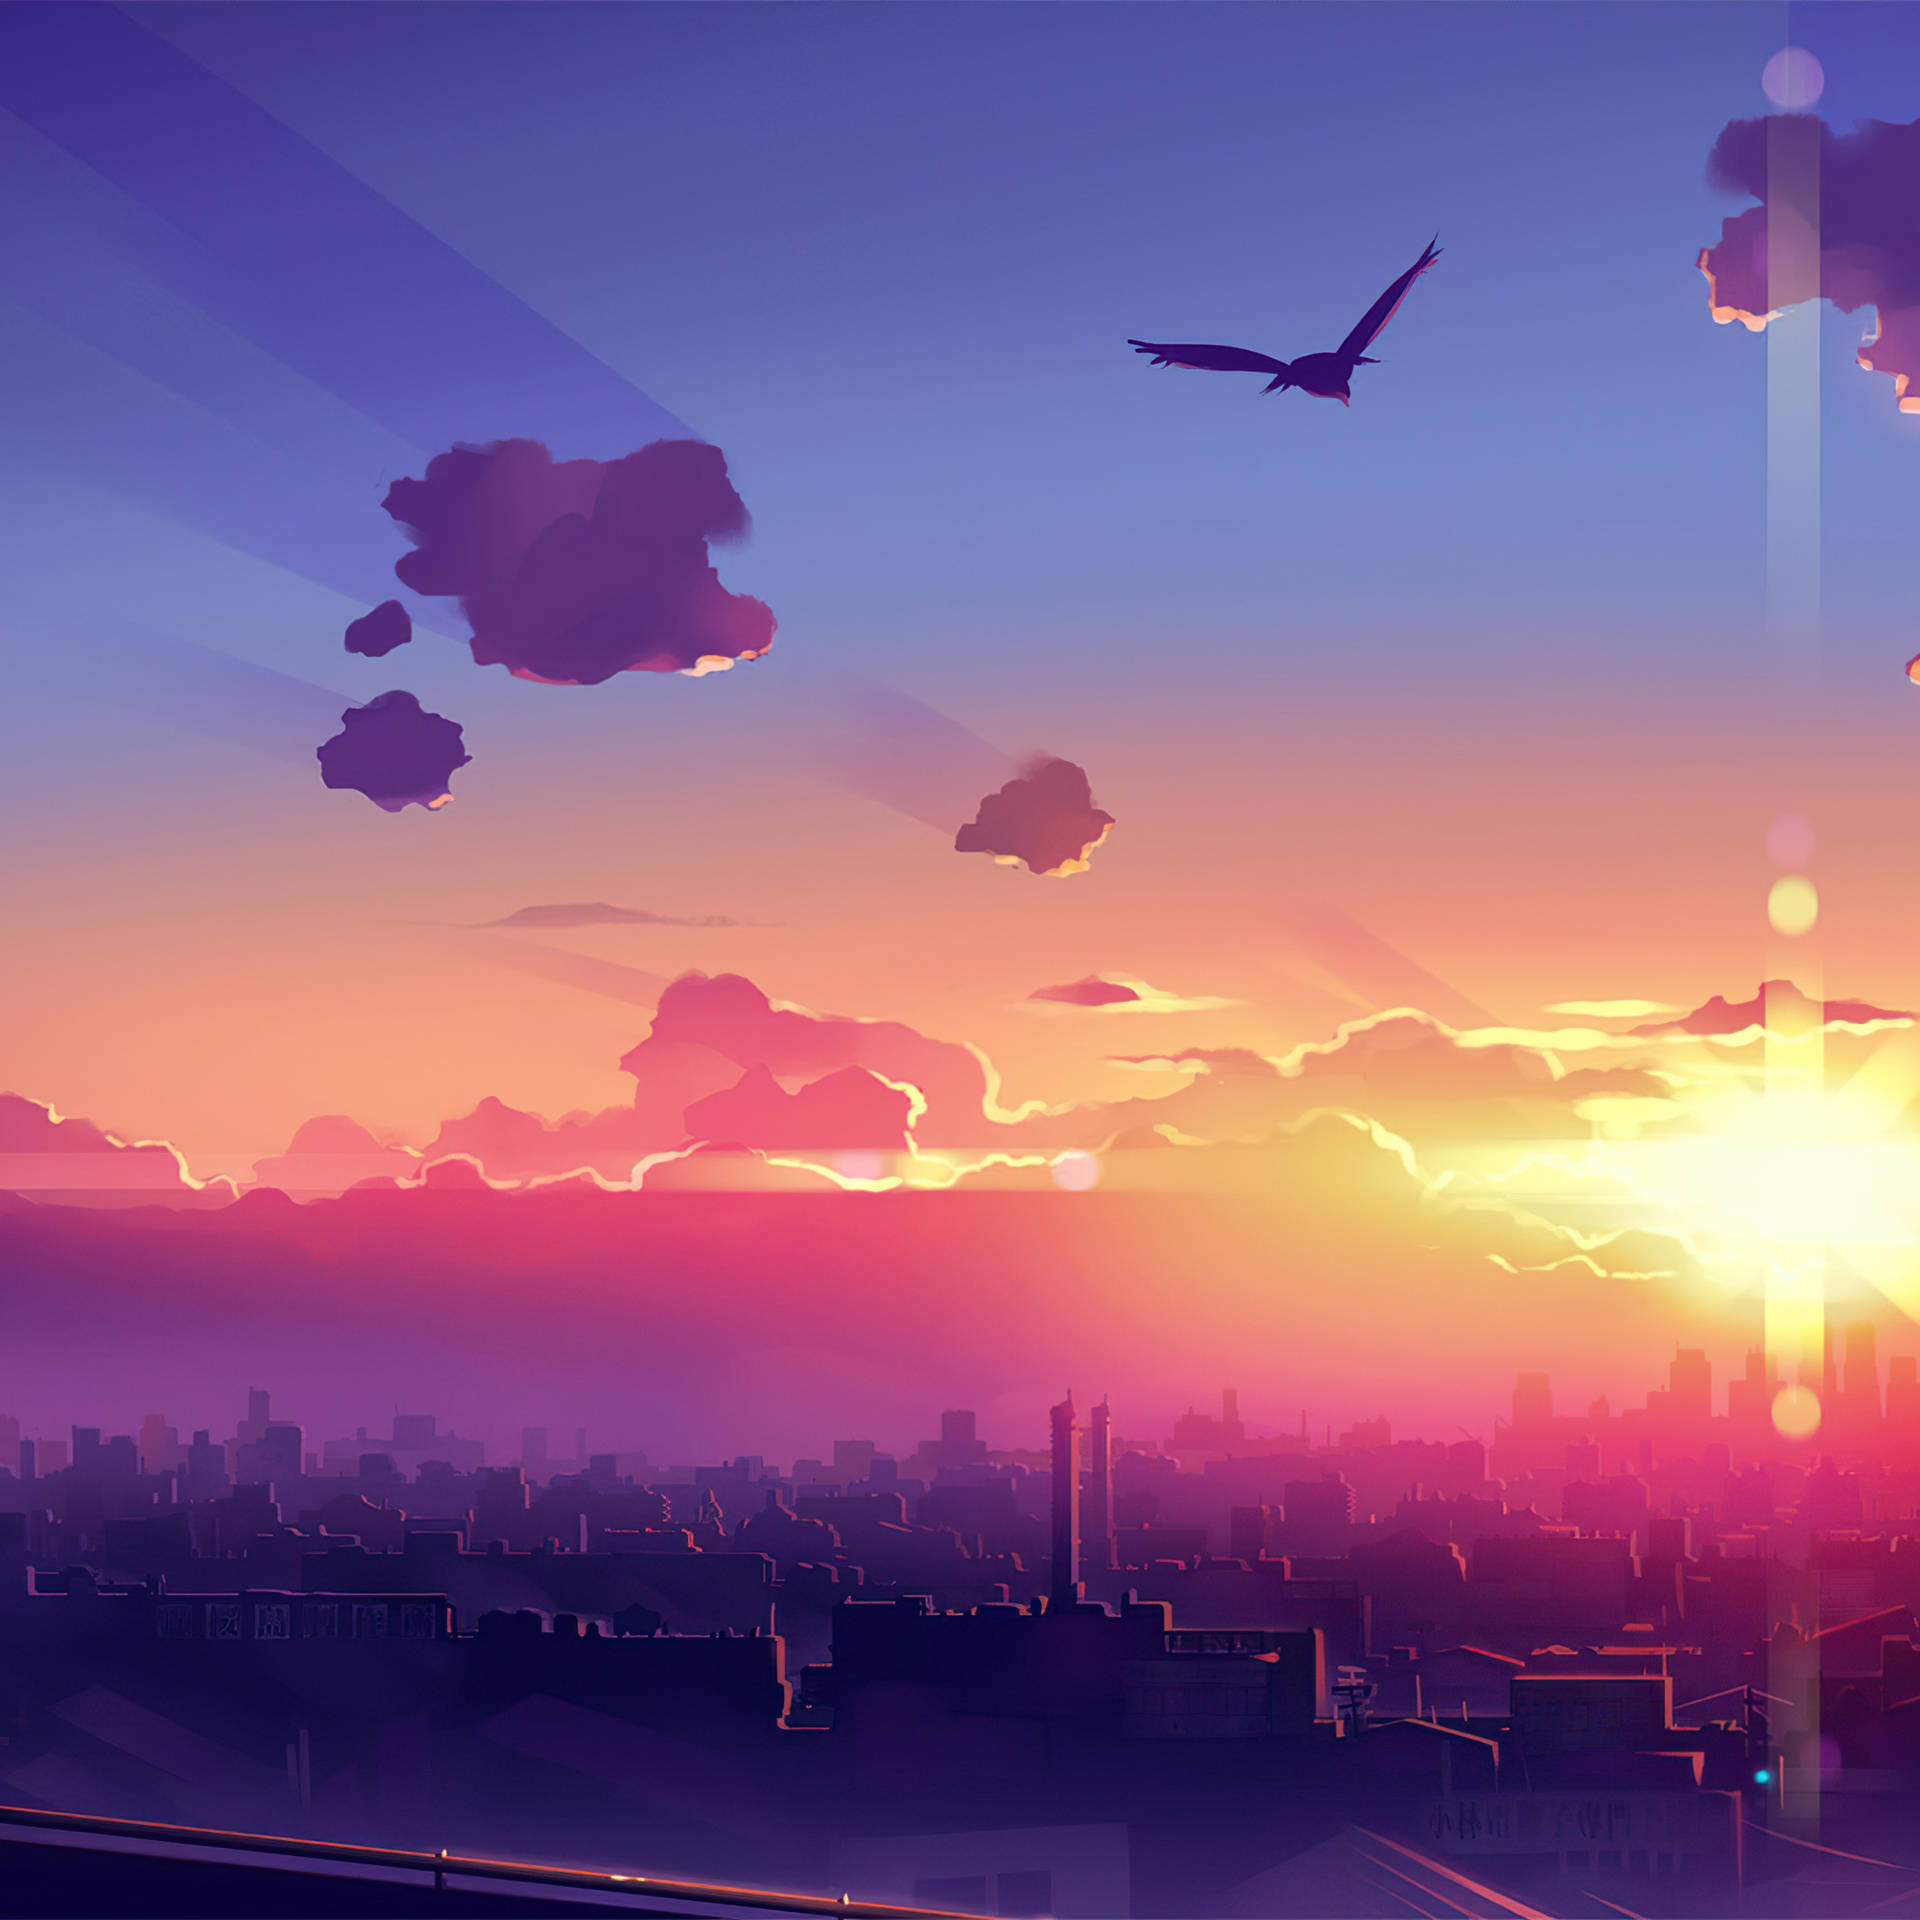 Tranquil Anime City During Sunset On An Ipad